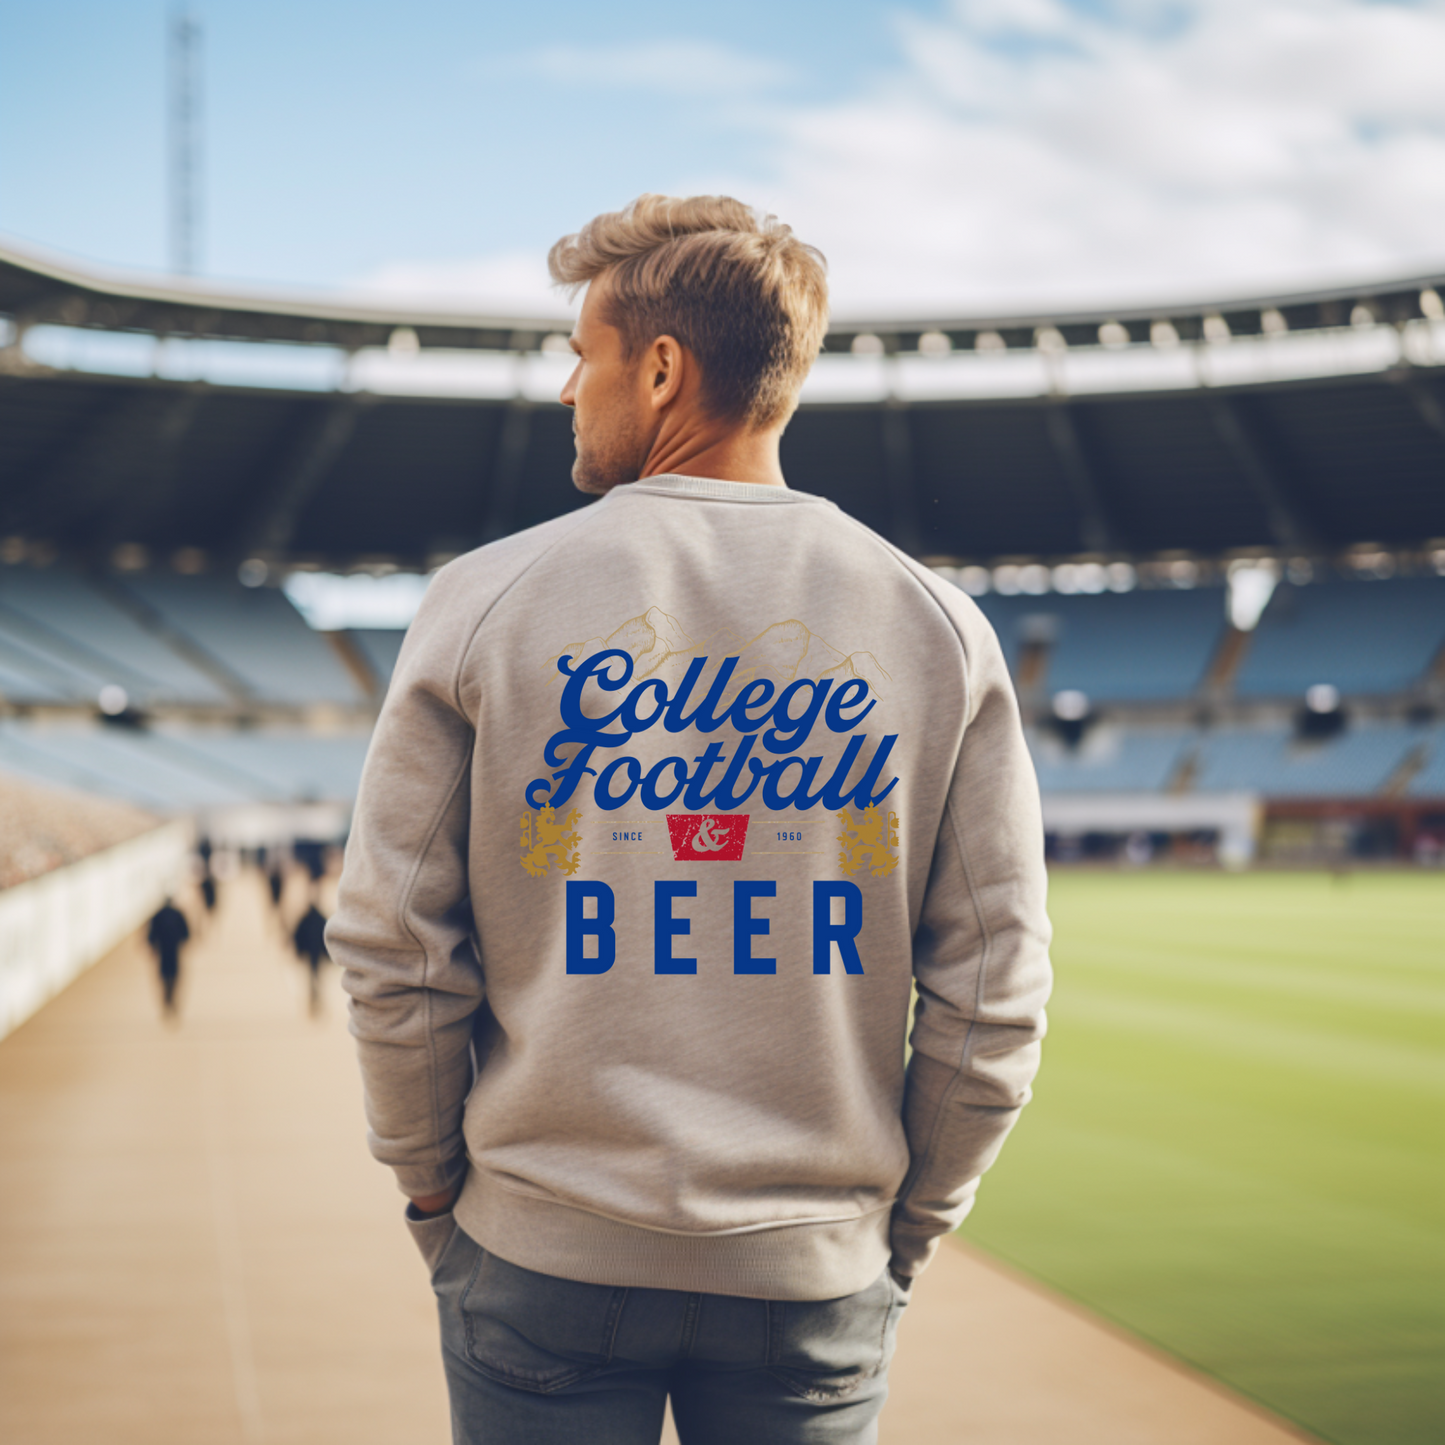 (shirt not included) College Football & Beer - Clear Film Transfer